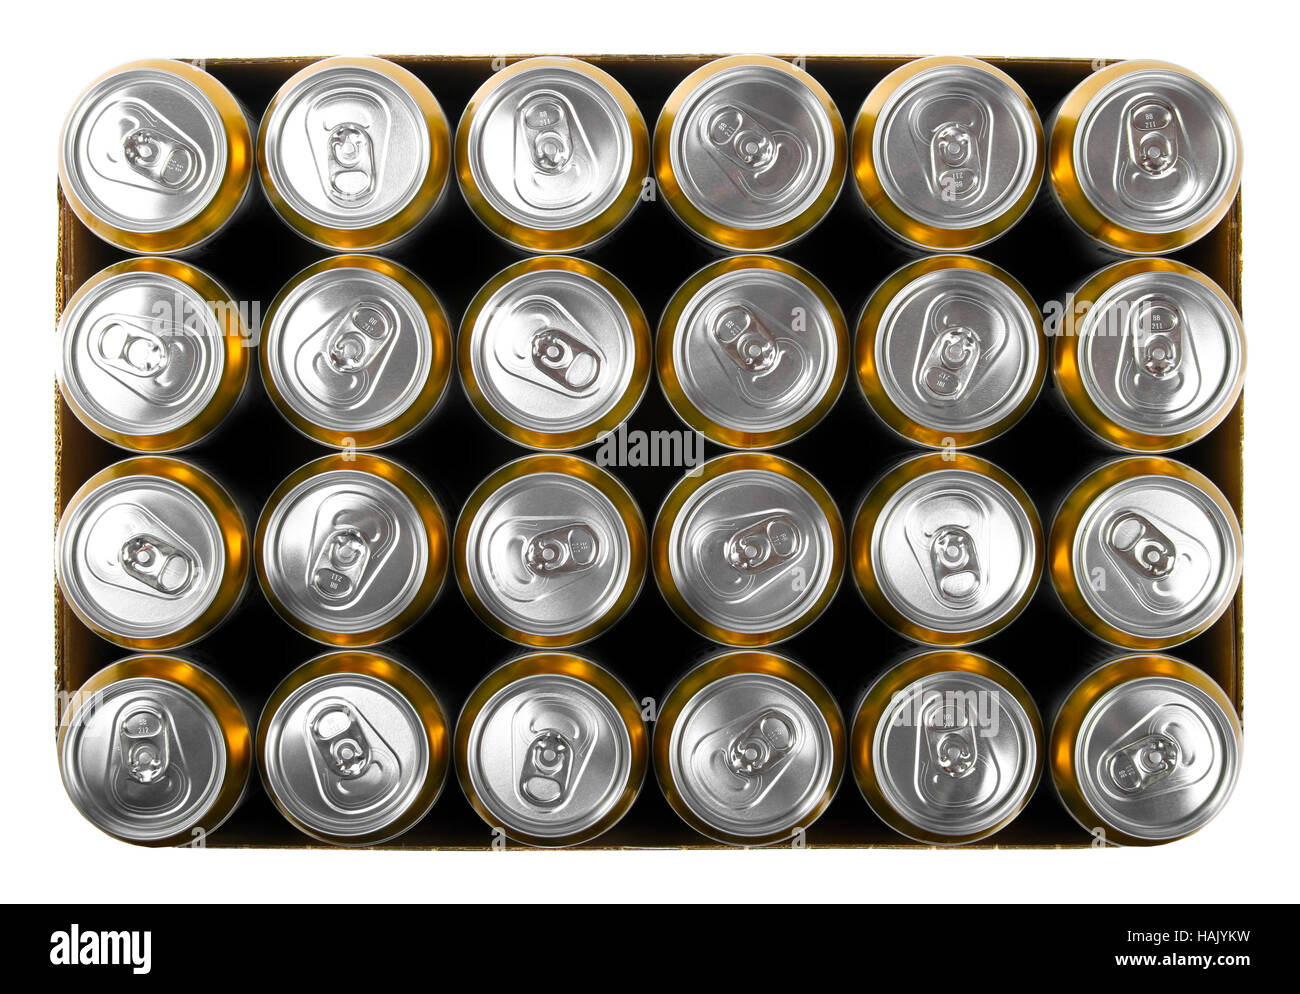 box of beer cans isolated on white Stock Photo